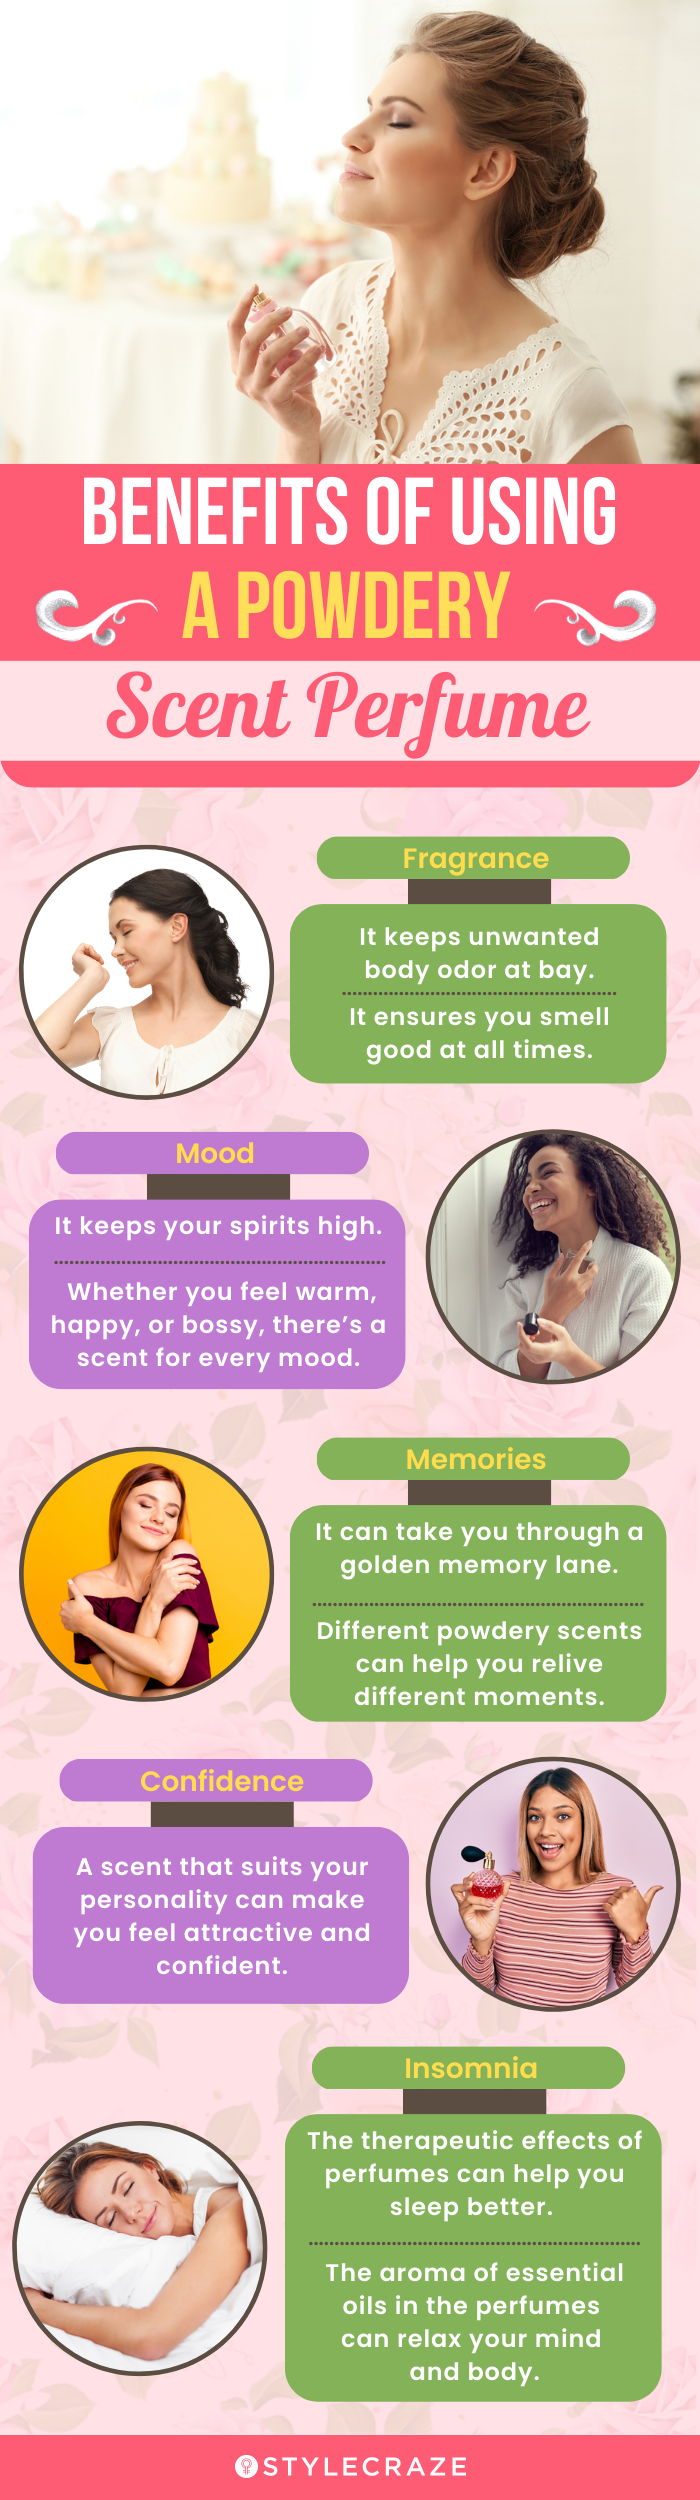 Benefits Of Using A Powdery Scent Perfume(infographic)